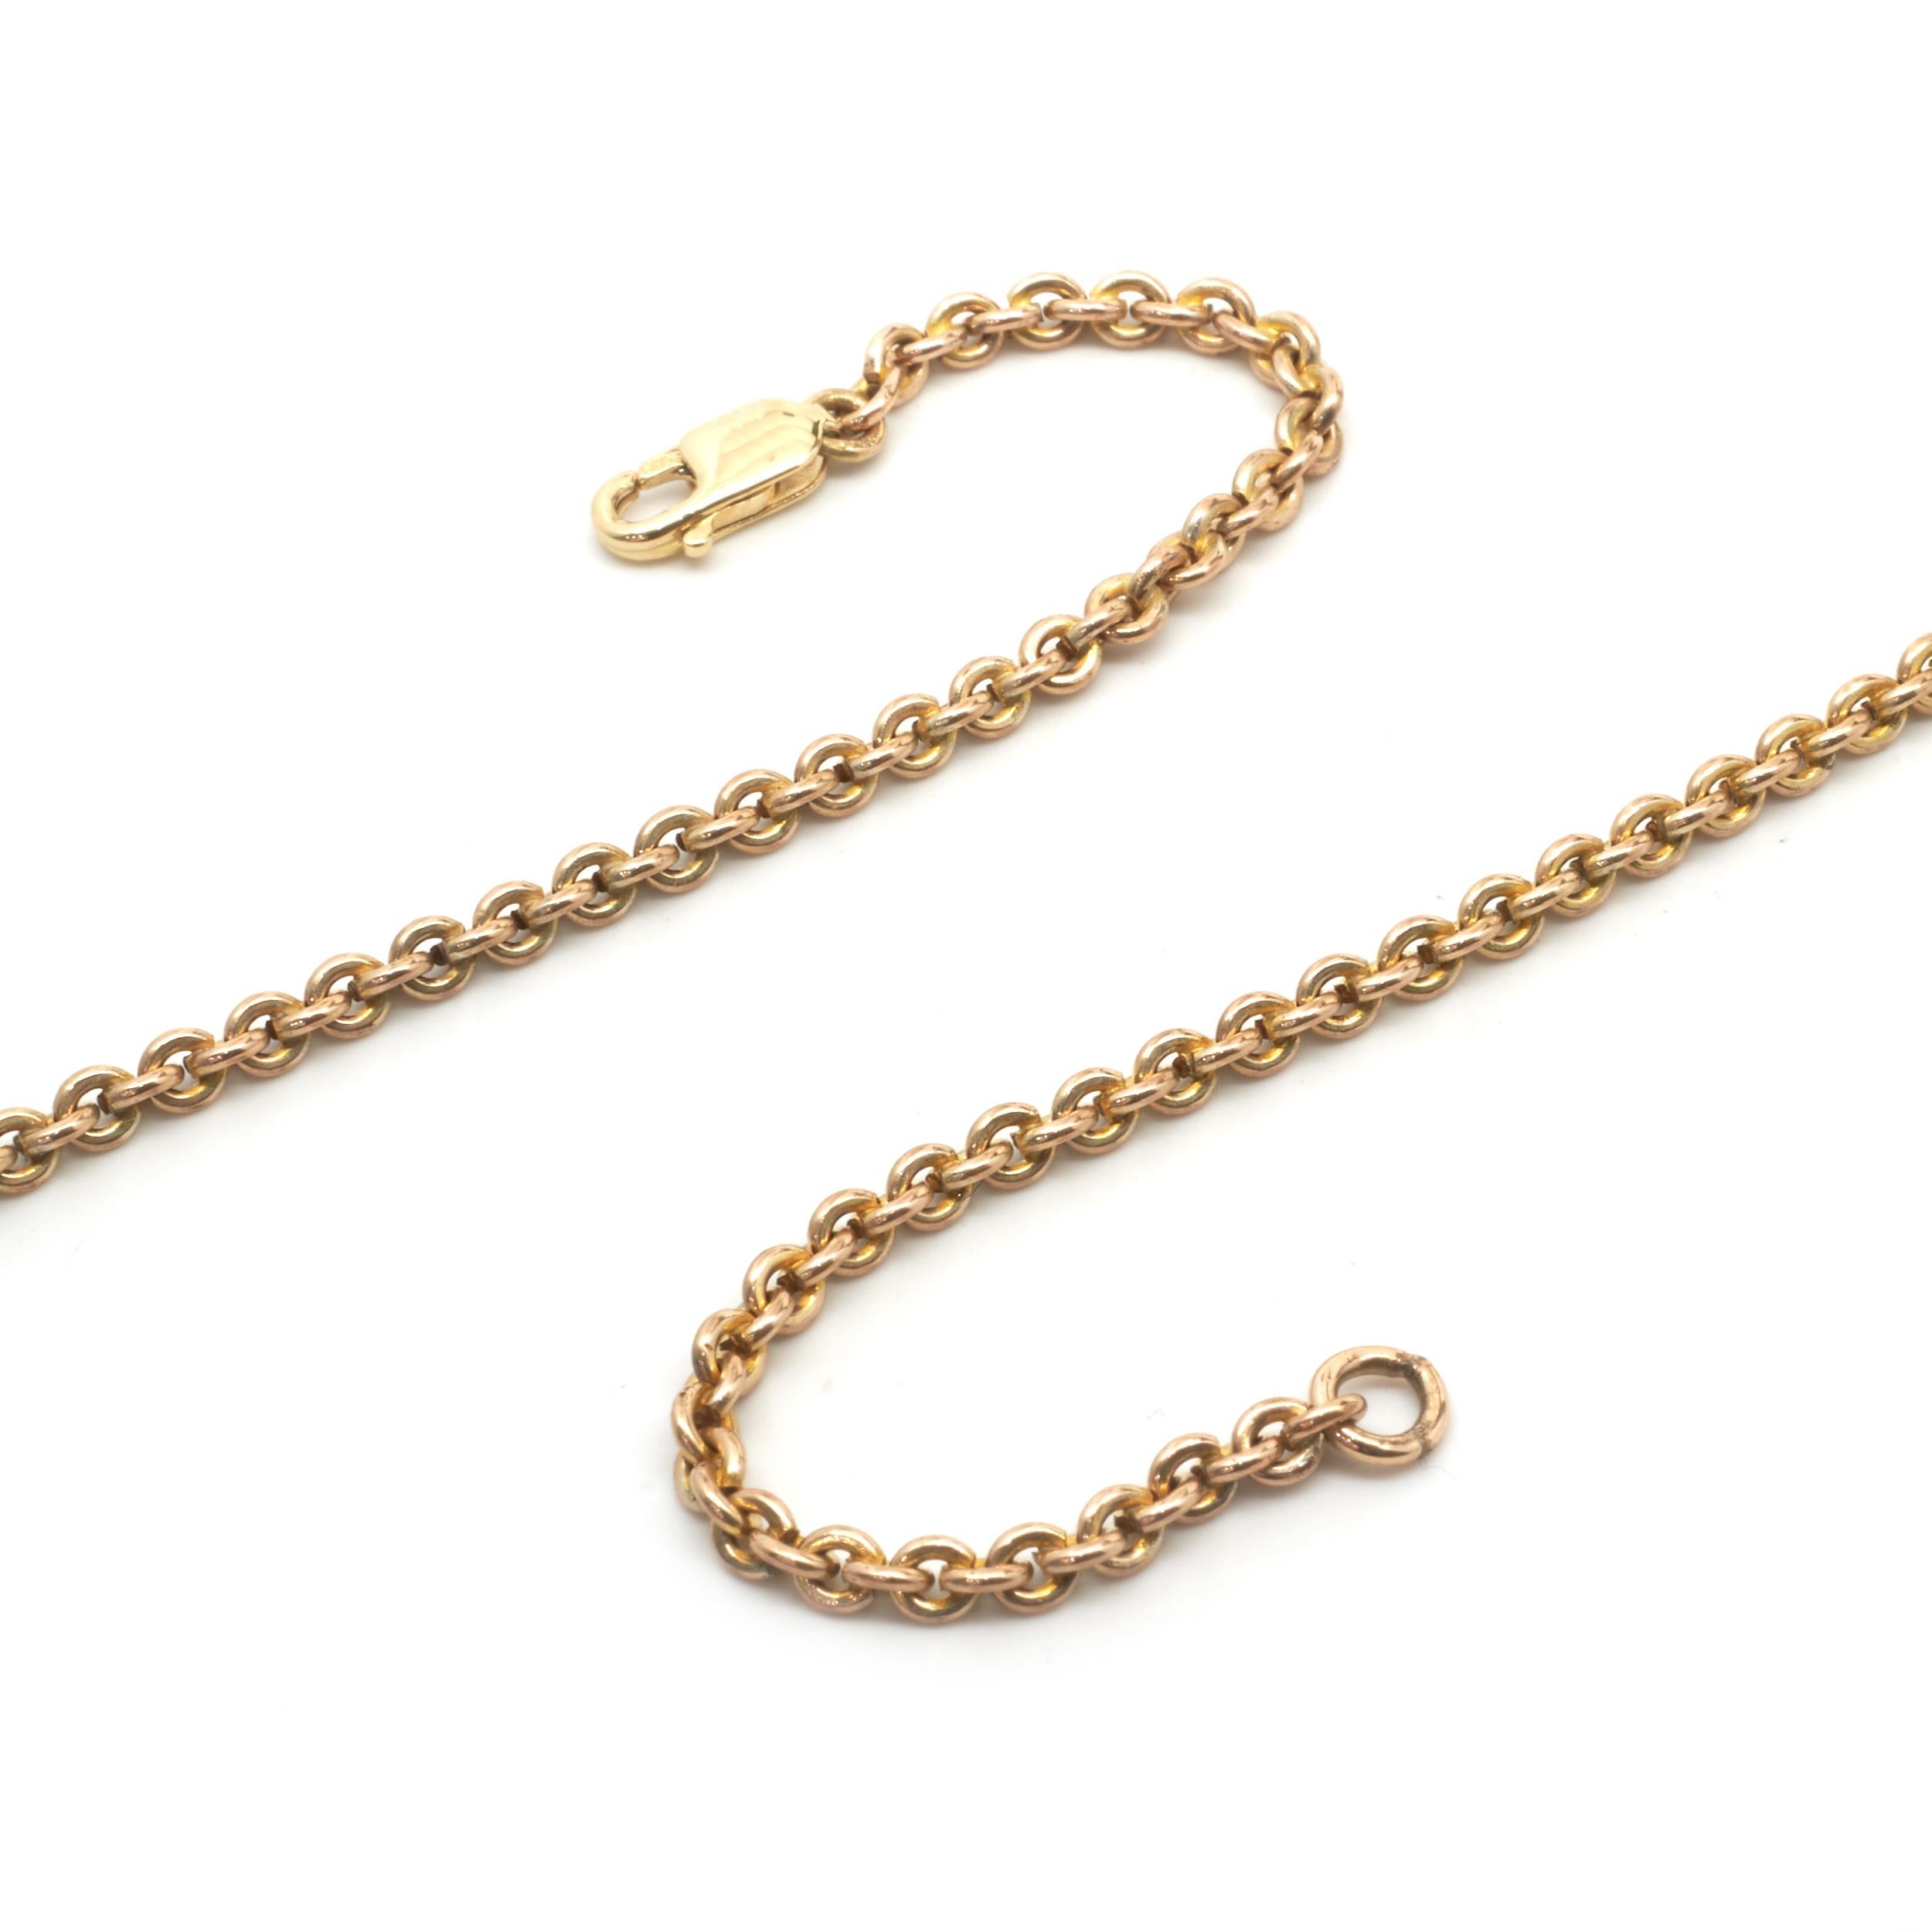 Material: 10K yellow gold
Dimensions: necklace measures 24-inches, 2mm wide
Weight: 8.84 grams

